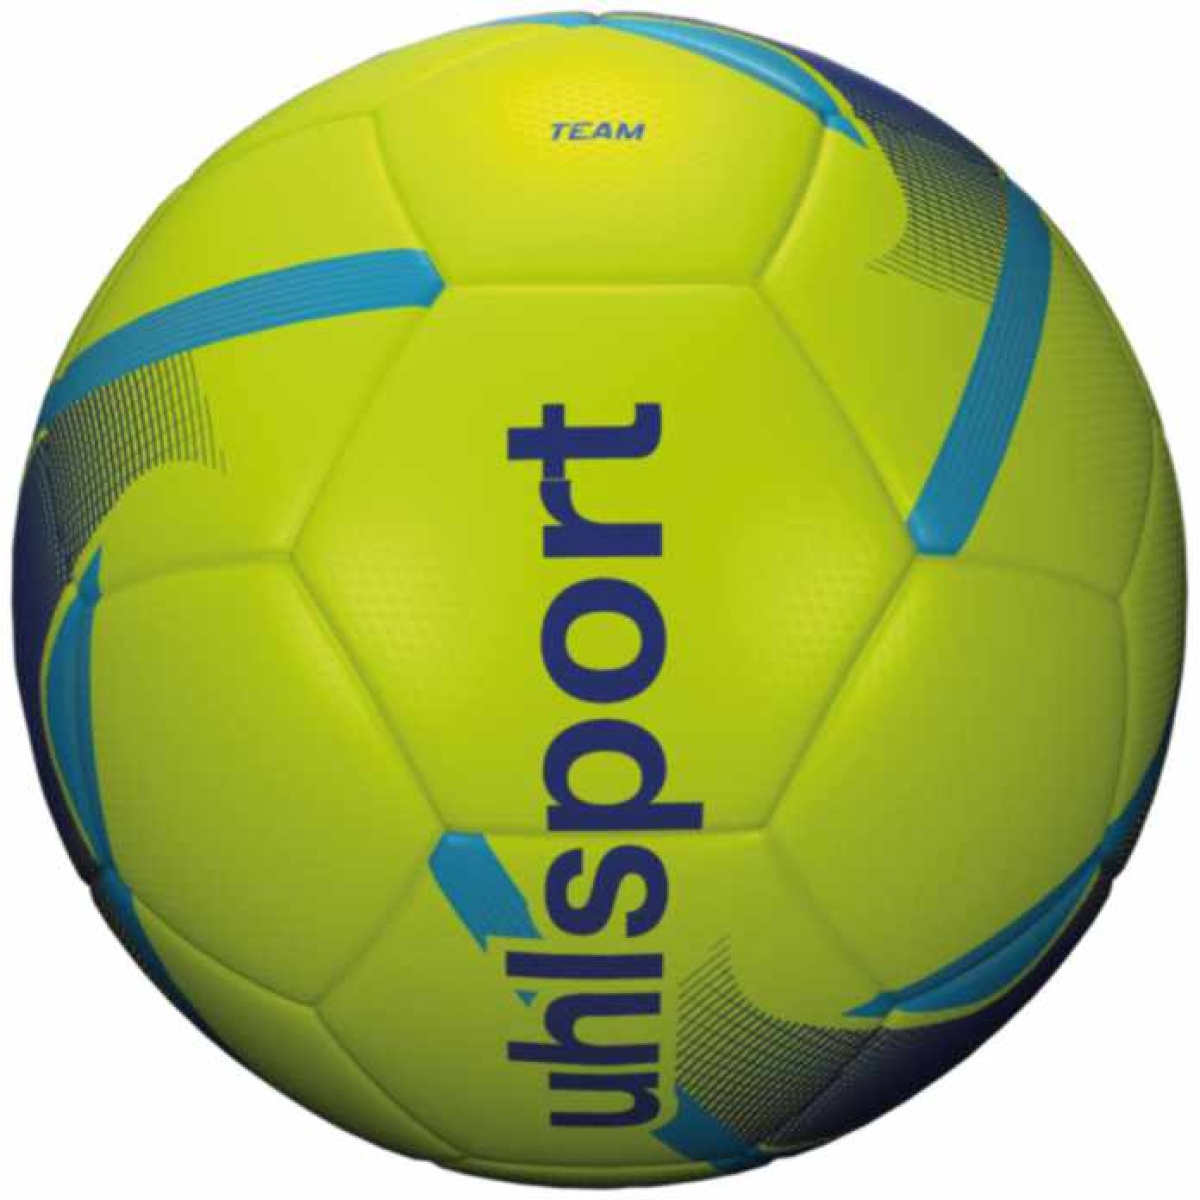 Accessory - Uhlsport Team Training Ball, Canvey Island Youth FC, Canvey Island Ladies FC, Canvey Island United FC, Rayleigh FC, Linford Wanderers FC, Essex Comets FC, Supreme Youth FC, Thundersley Rovers FC, Essex Royals FC, Benfleet Villa FC, Benfleet FC, Island Boys FC, Rayleigh Town FC